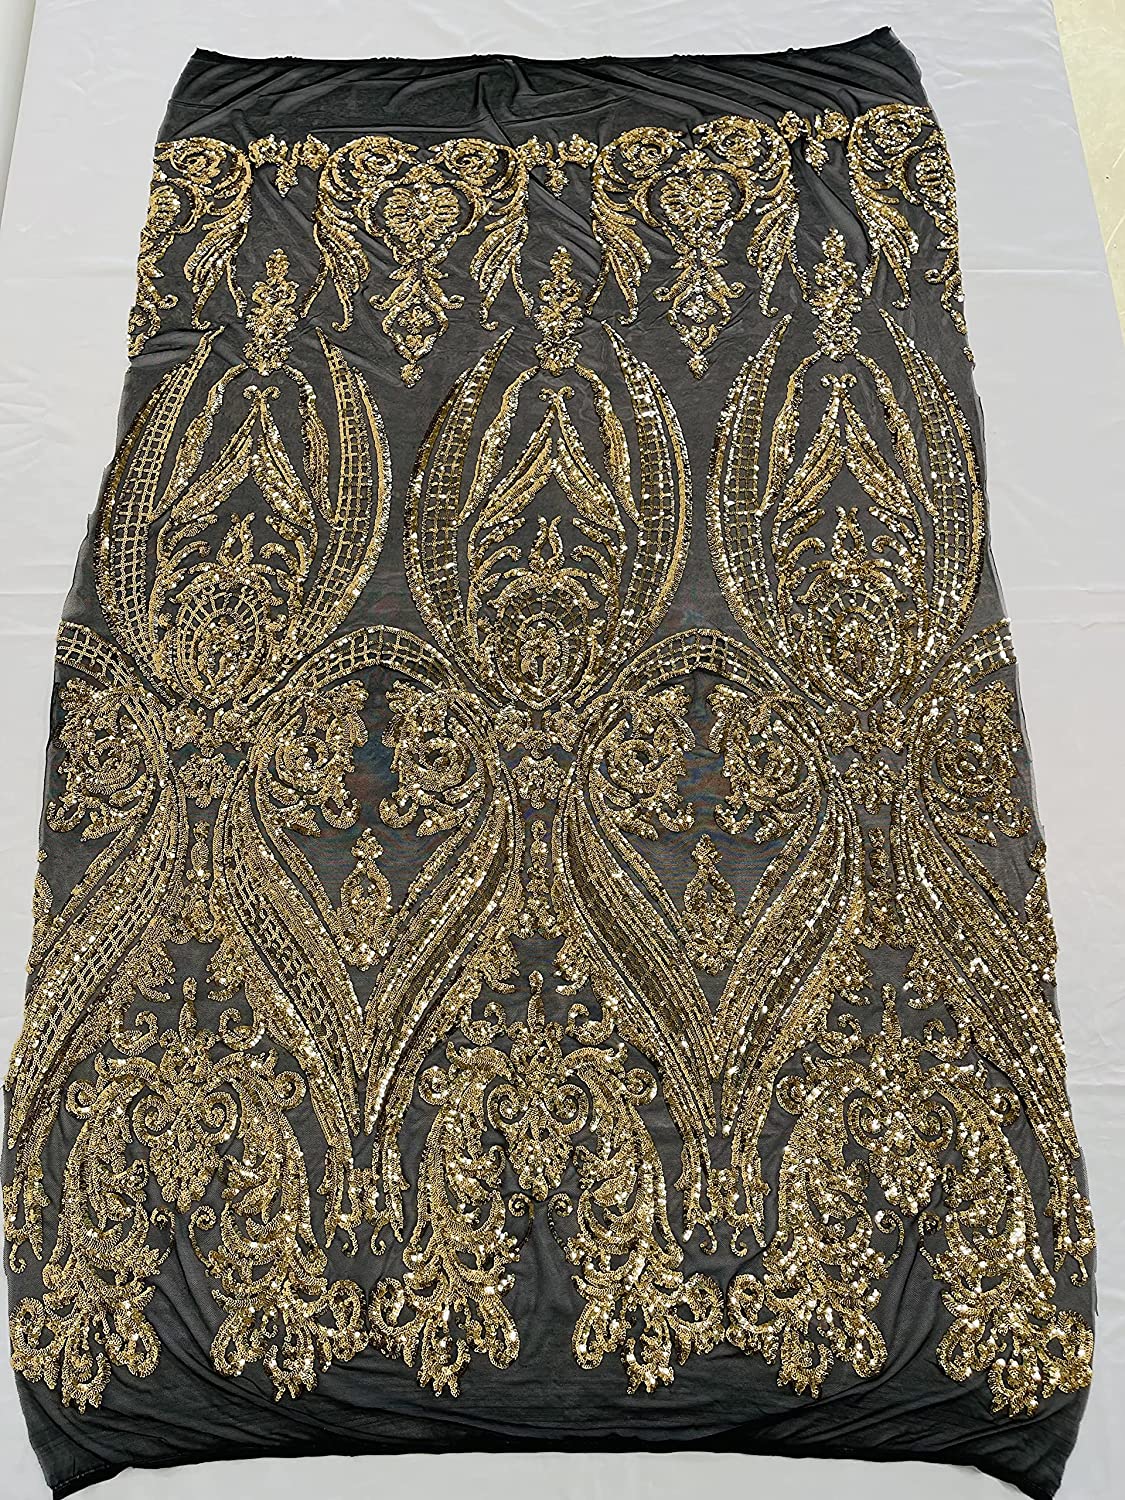 Empire Damask Design with Sequins Embroider On A 4 Way Stretch Mesh Fabric (1 Yard, Gold on Black Mesh)